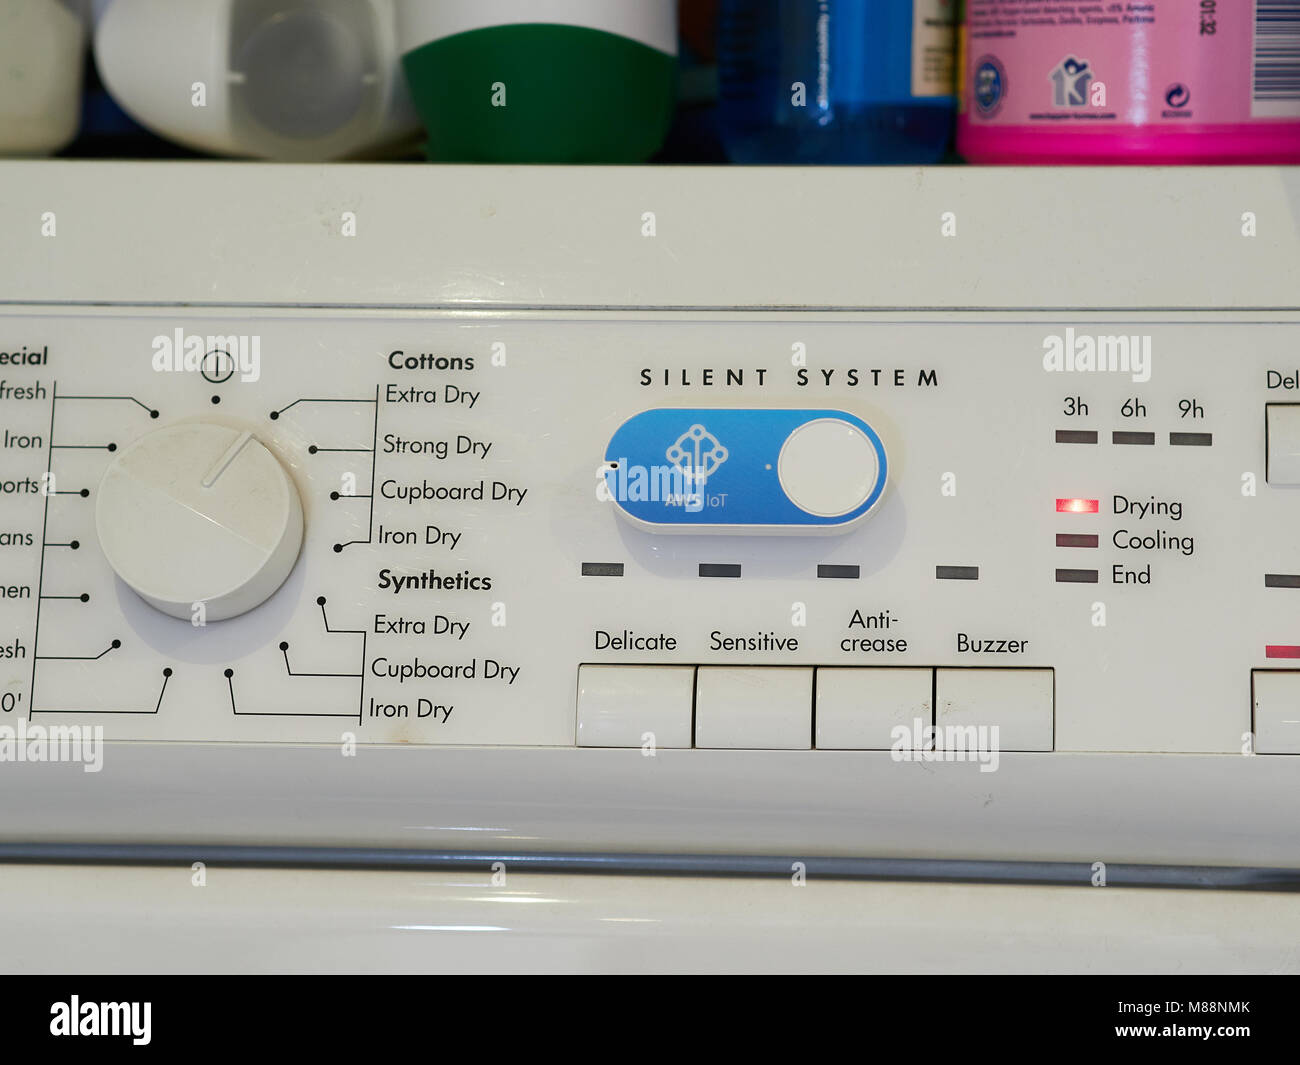 Amazon AWS Dash button - connected IoT device for automatic tasks or  purchases. Shown on washer dryer in a home kitchen Stock Photo - Alamy